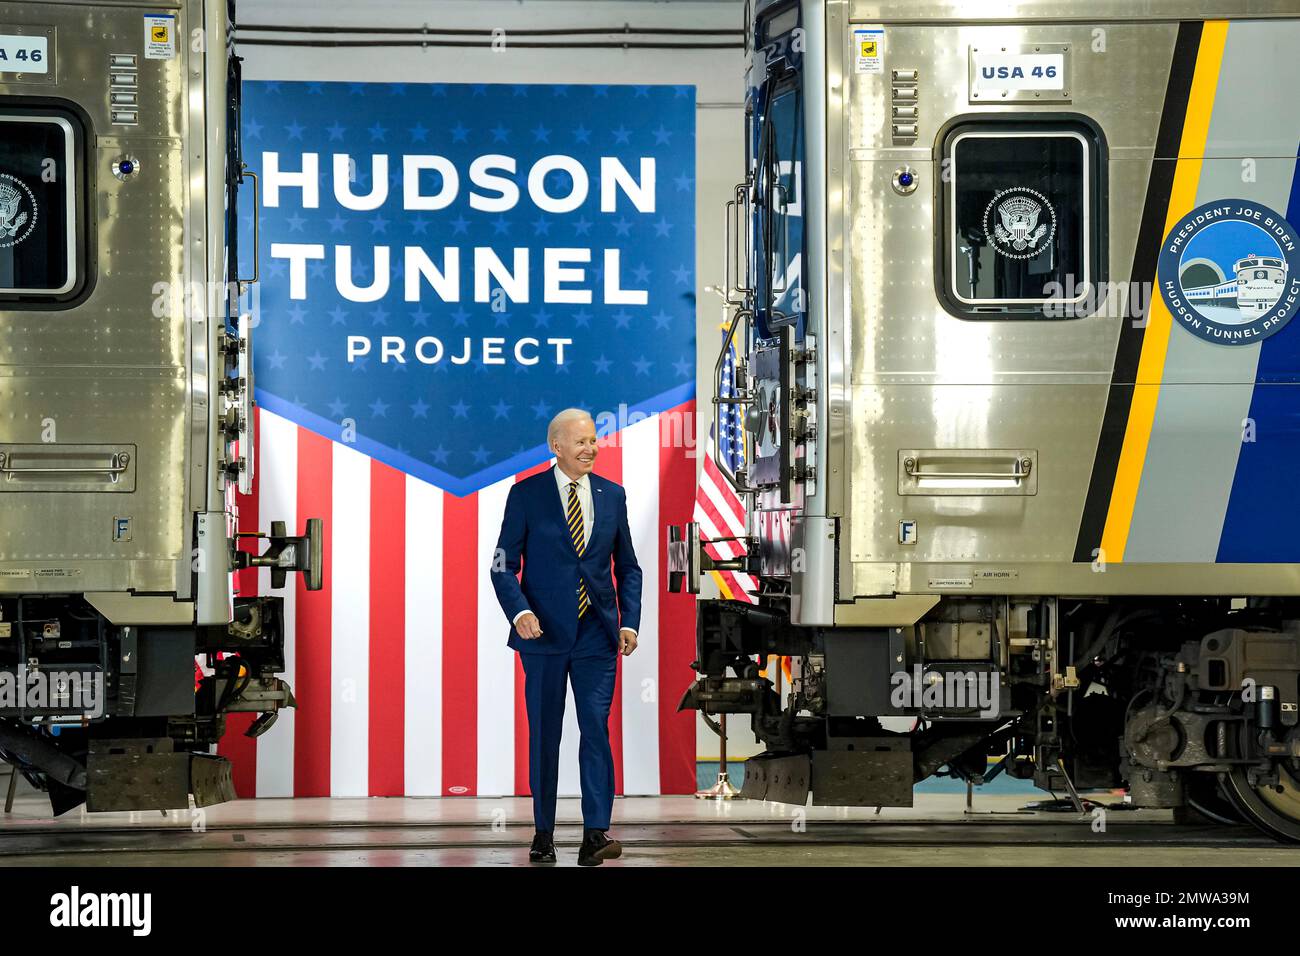 New York City, United States of America. 31 January, 2023. U.S President Joe Biden arrives to speak at the construction site of the Hudson Tunnel Project as he highlights his bipartisan infrastructure plan at the West Side Rail Yard, January 31, 2023 in New York City. Credit: Adam Schultz/White House Photo/Alamy Live News Stock Photo